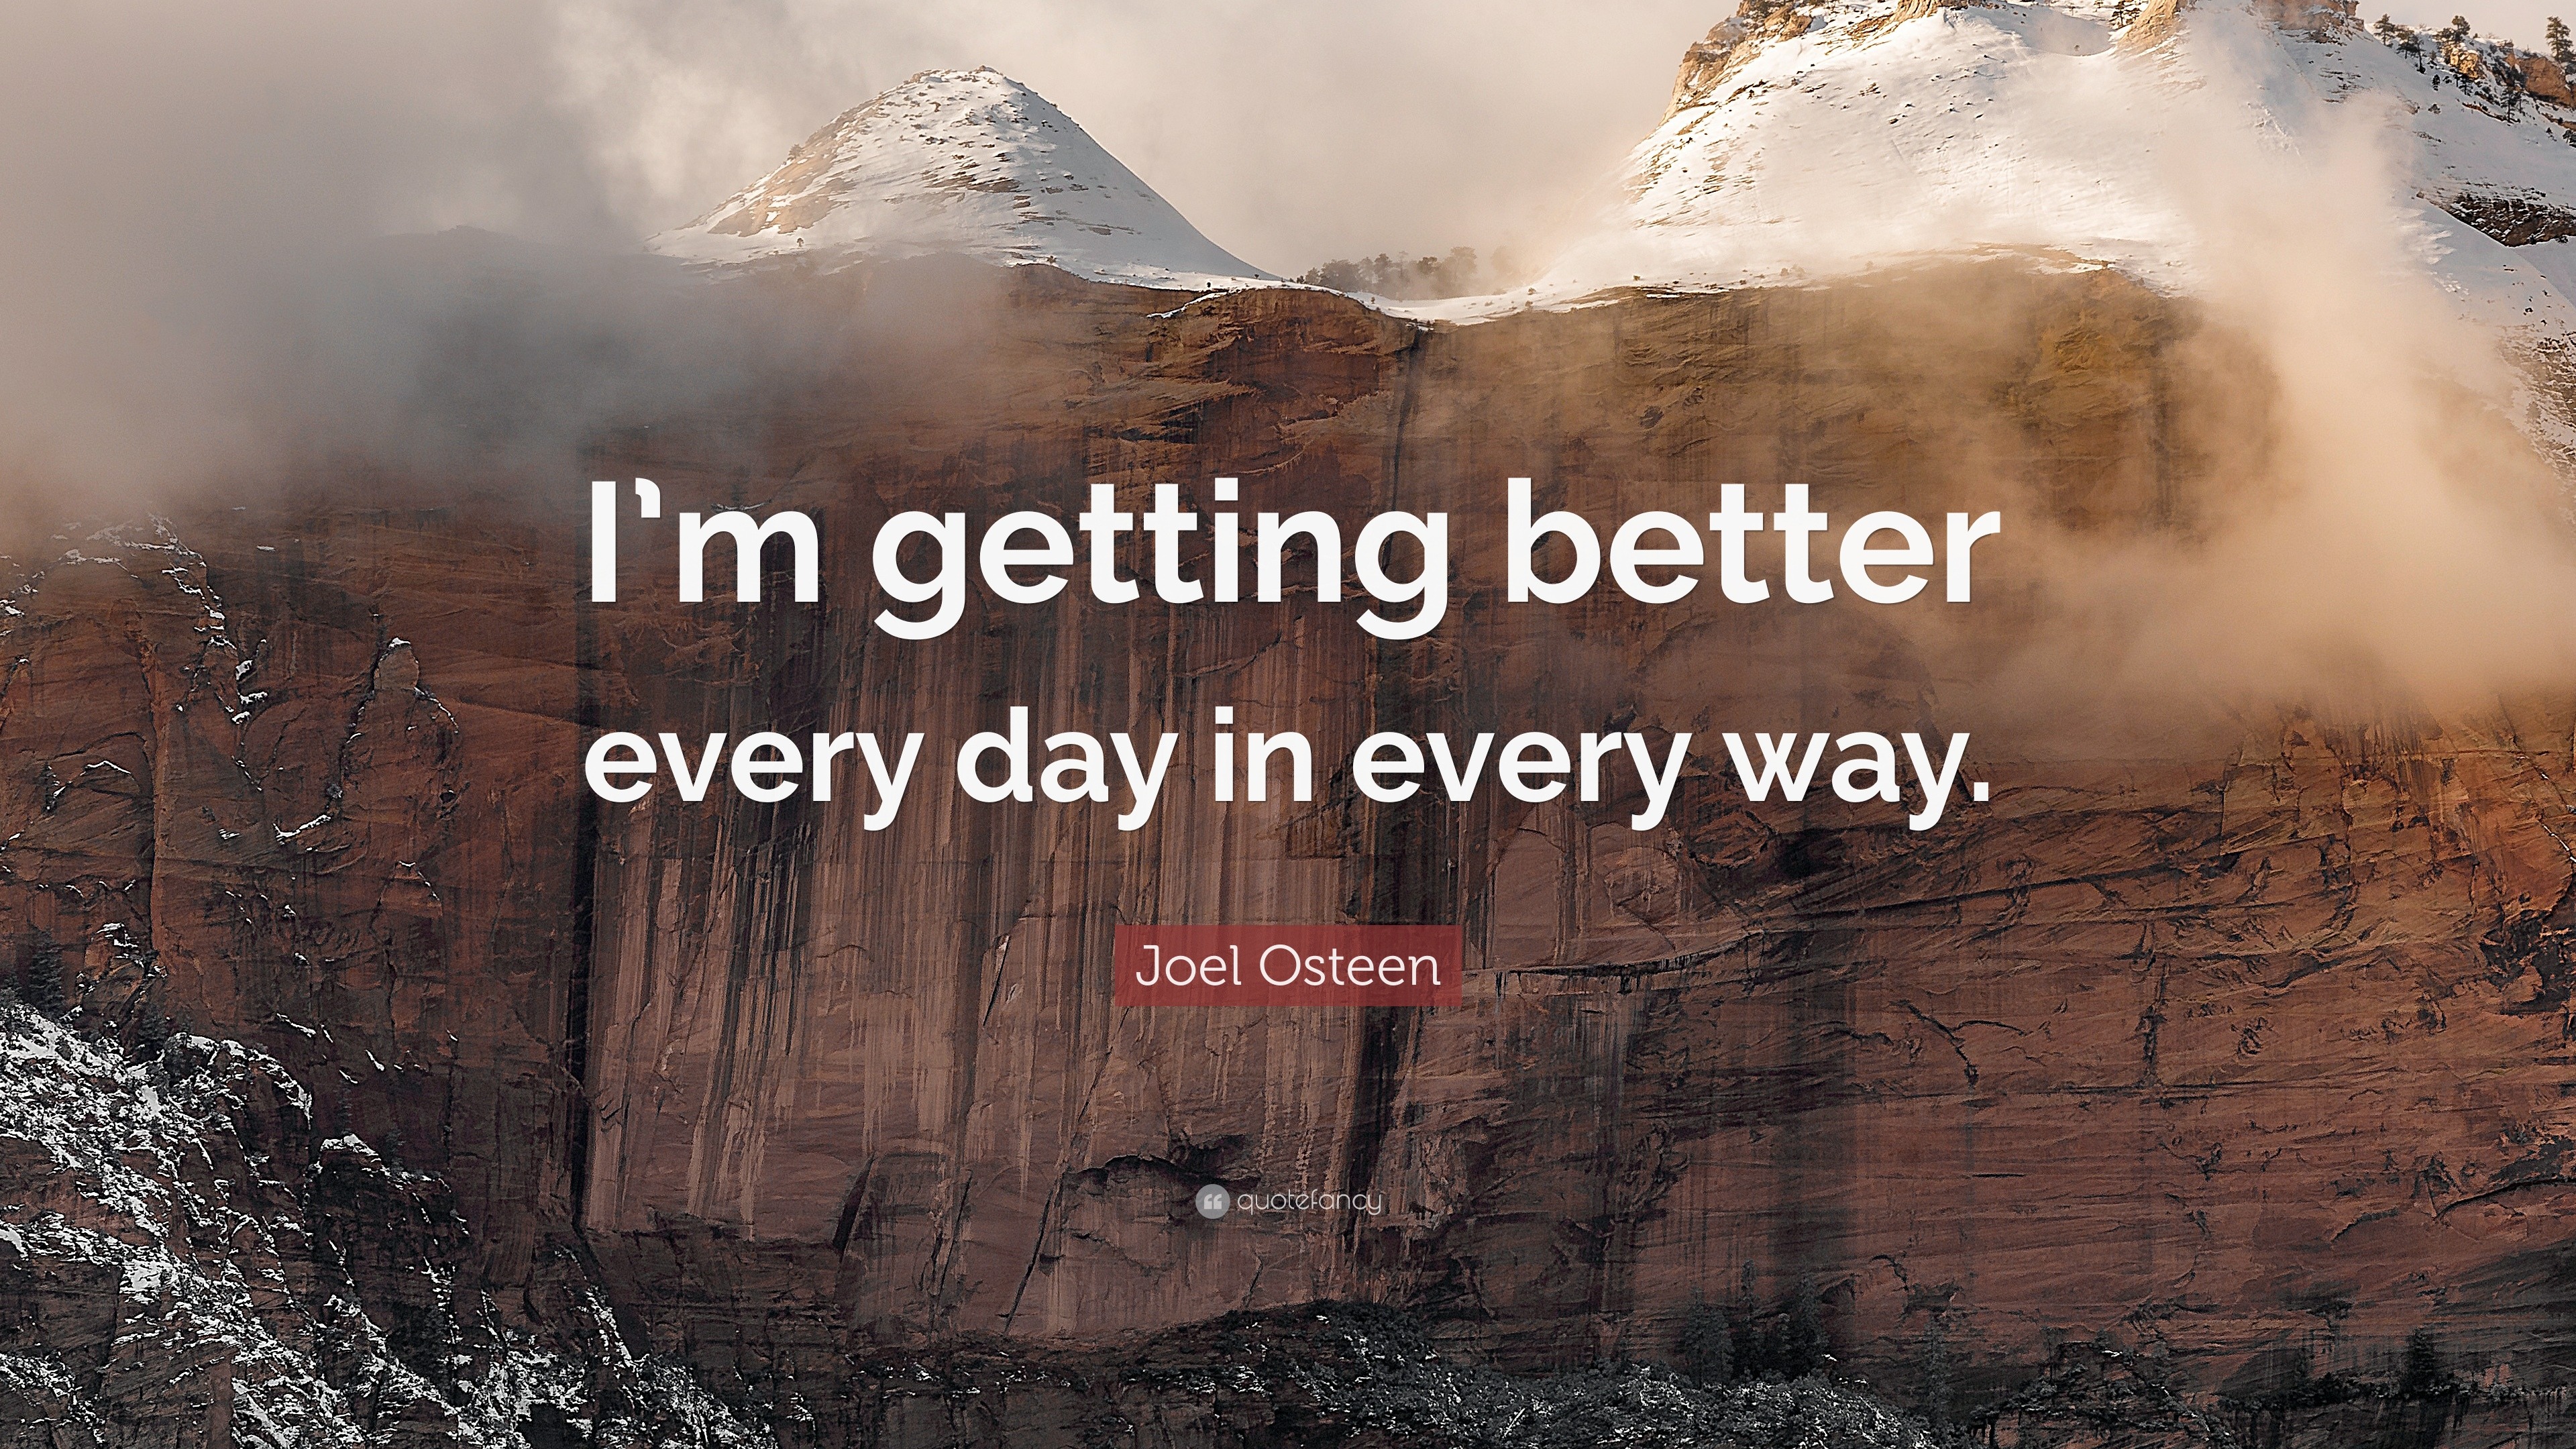 1713716 Joel Osteen Quote I m getting better every day in every way